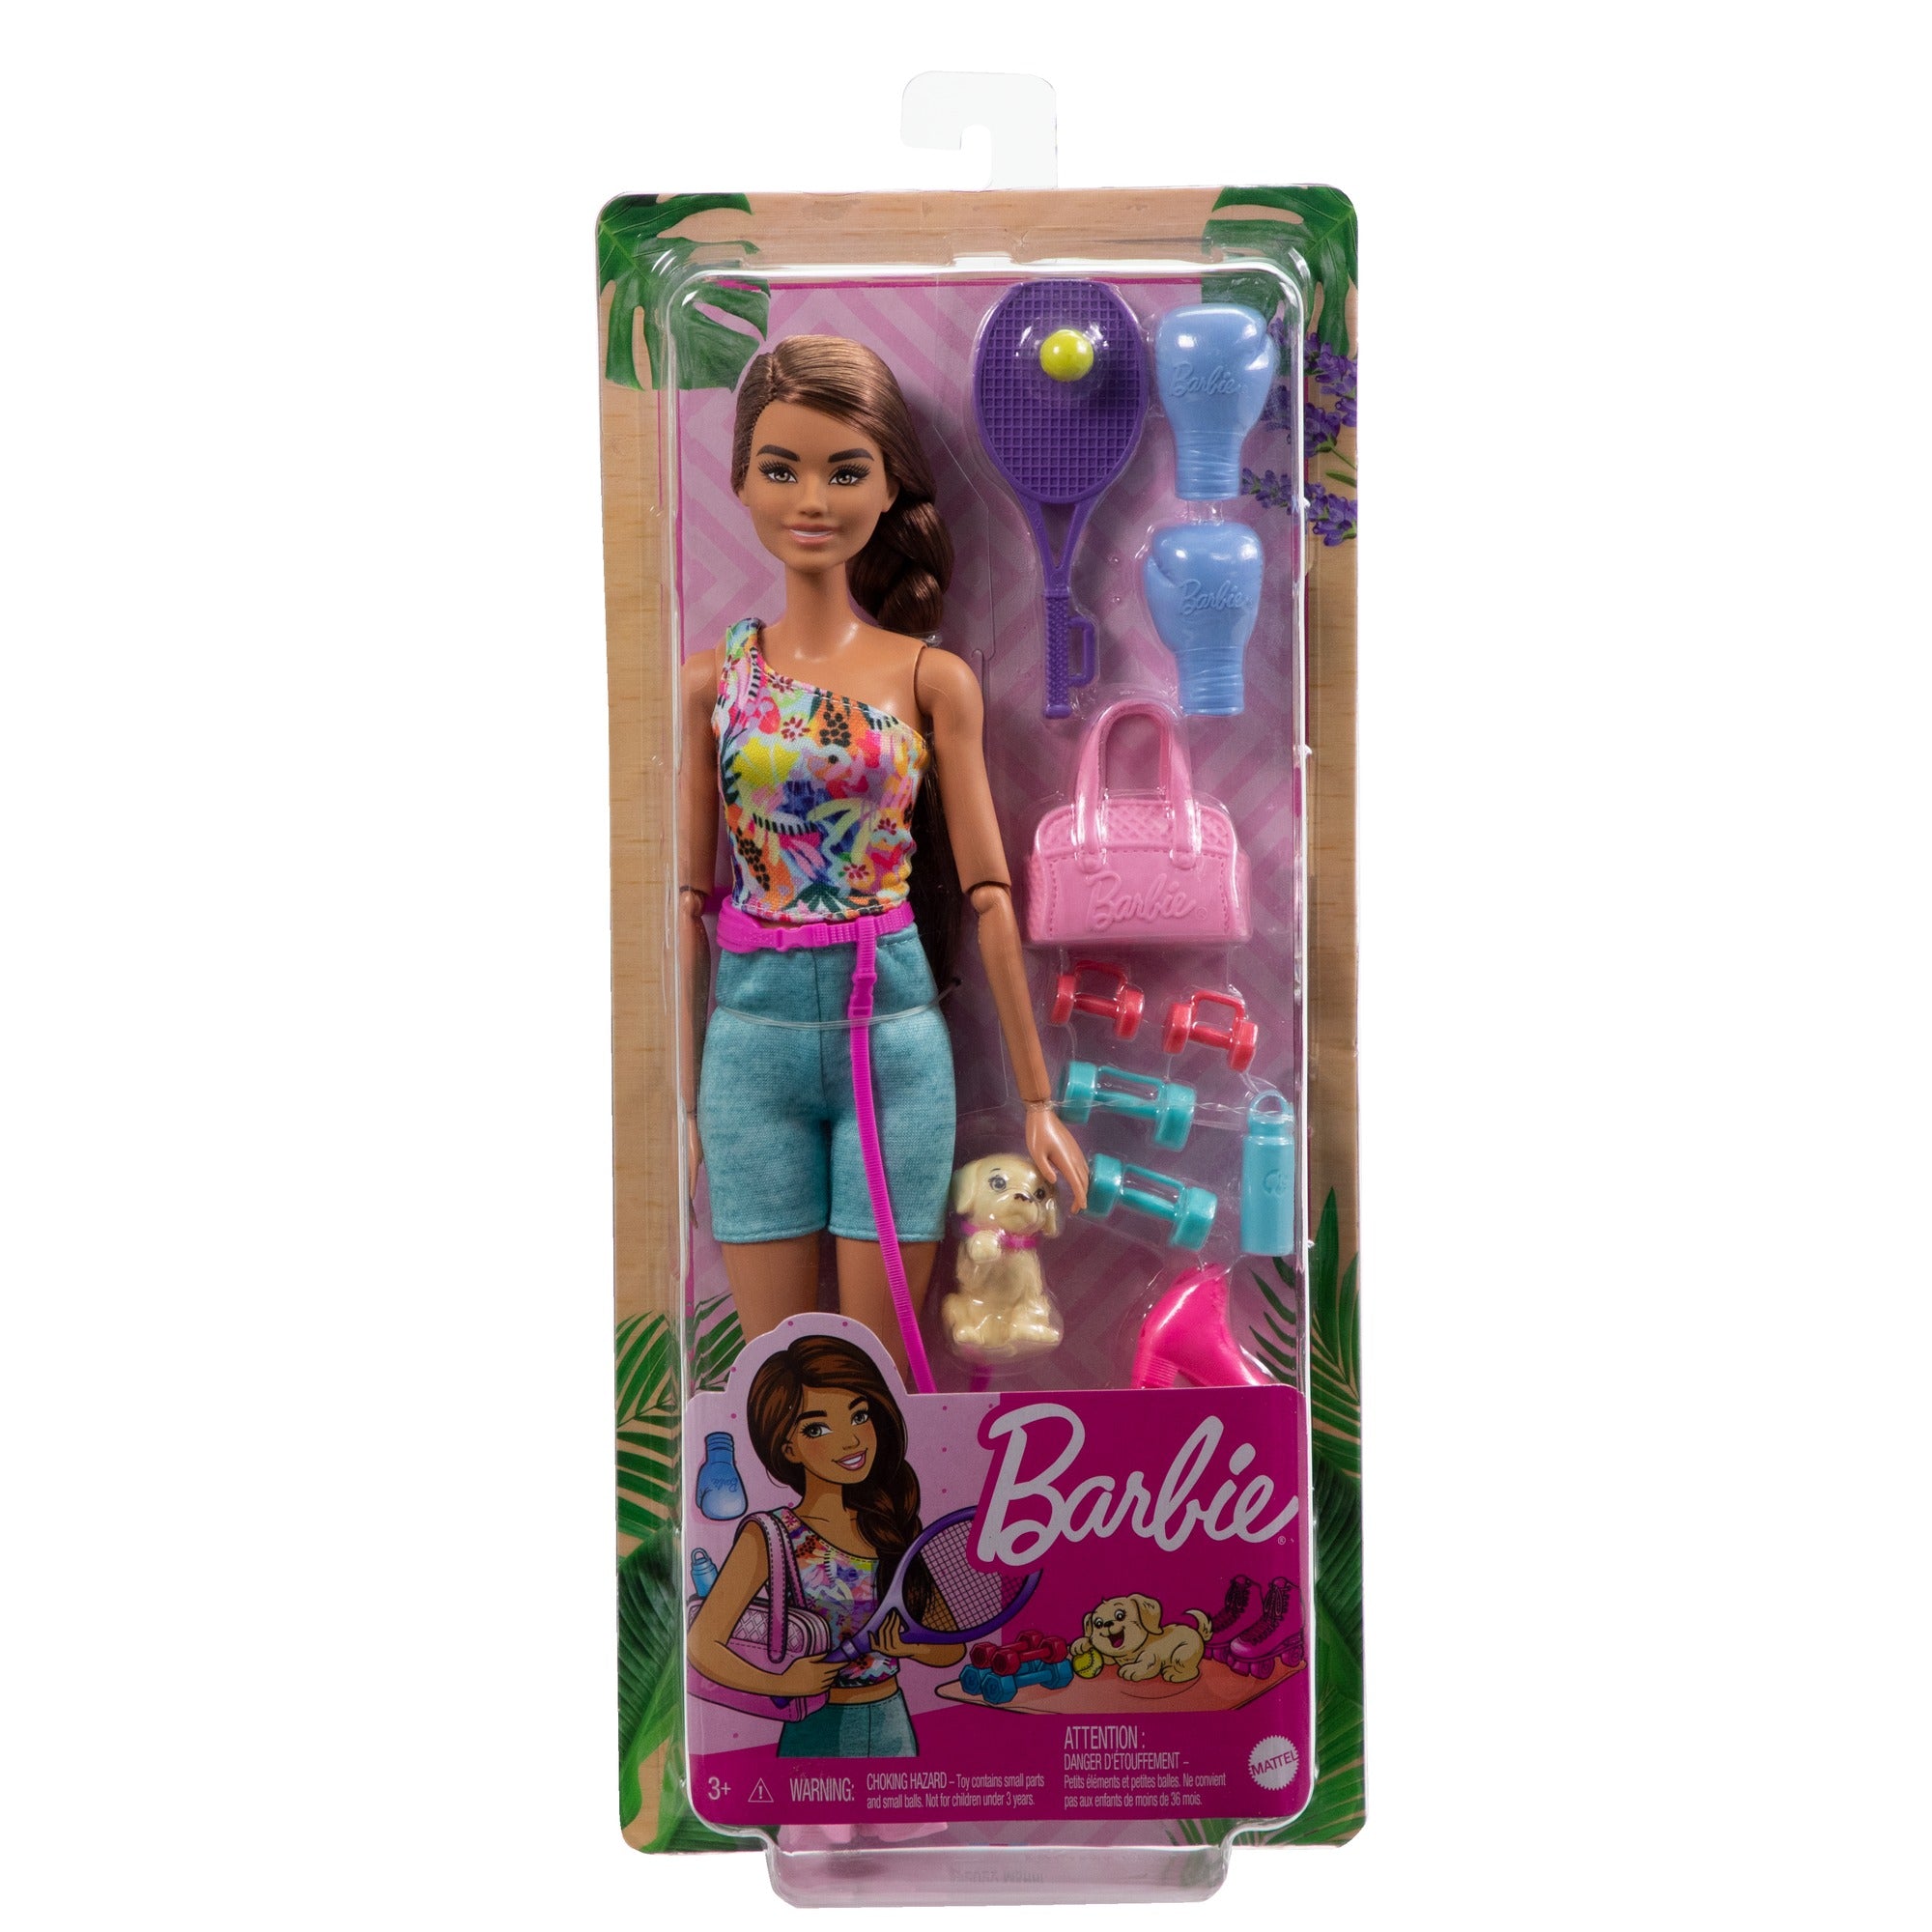 Barbie Wellness Doll Playset with Brunette Doll with Pet Puppy, Barbie Sets, Workout Theme with Accessories, Self-Care Series, Roller Skates and Tennis for Kids Ages 3+